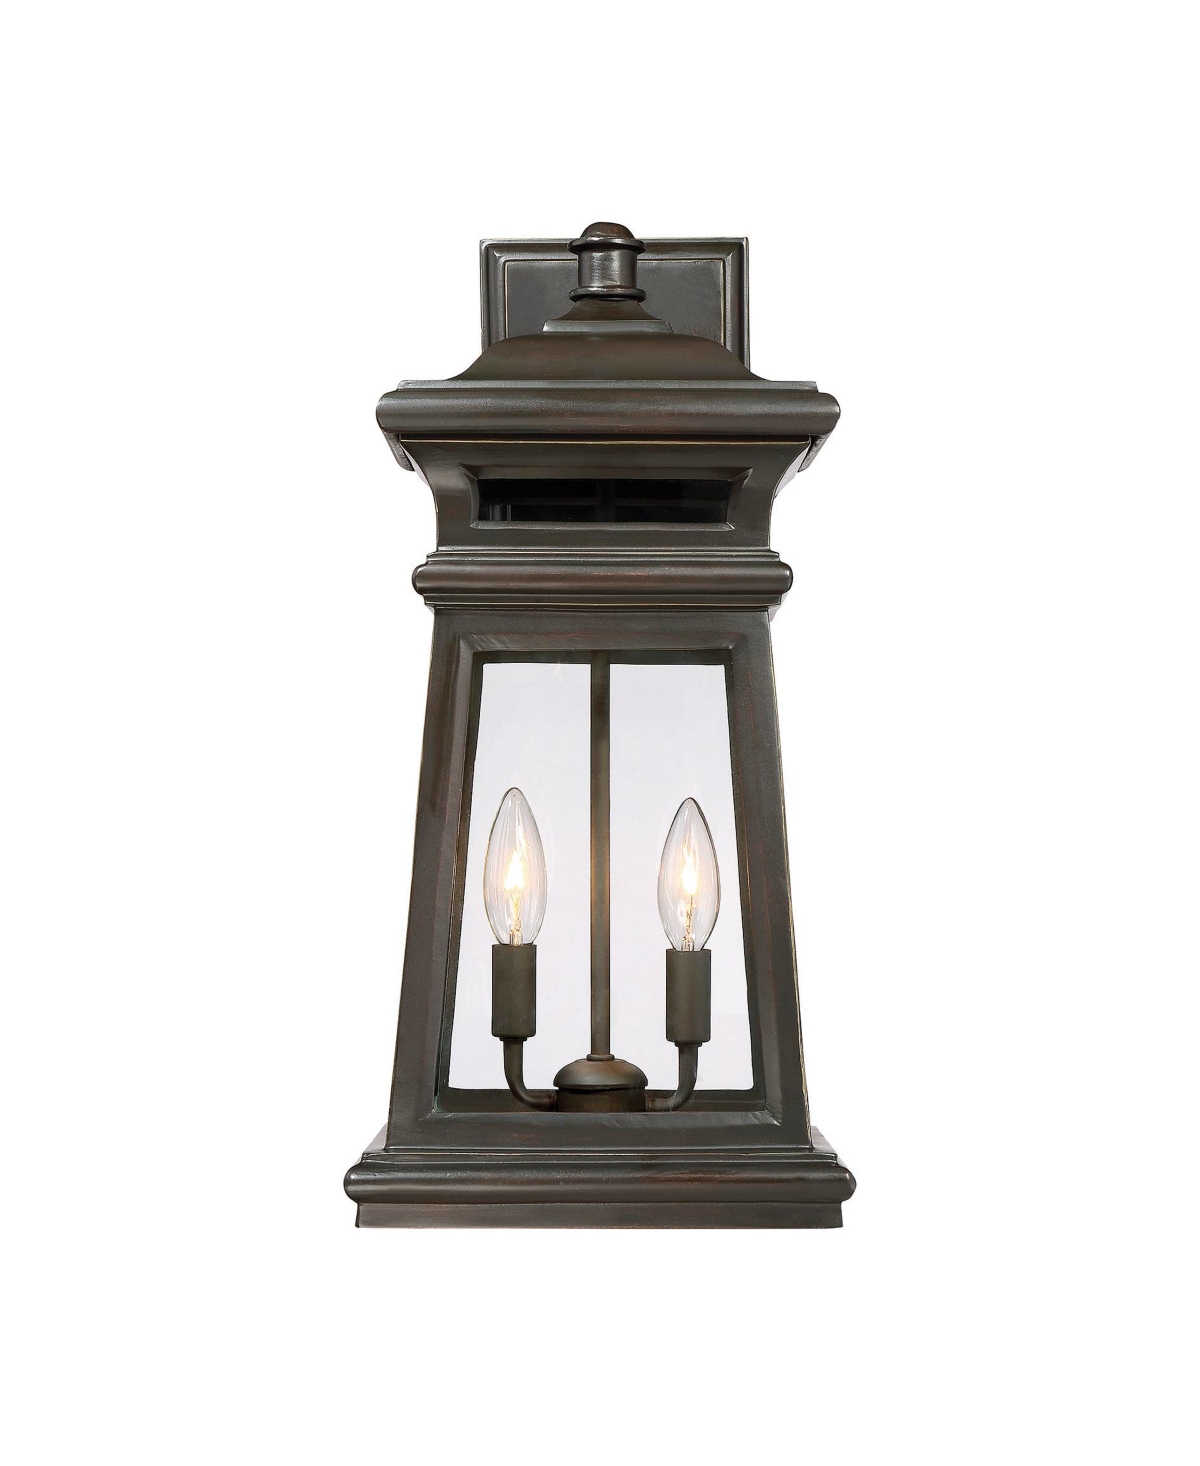 Taylor 2-Light Outdoor Wall Lantern in English Bronze with Gold - English bronze/gold